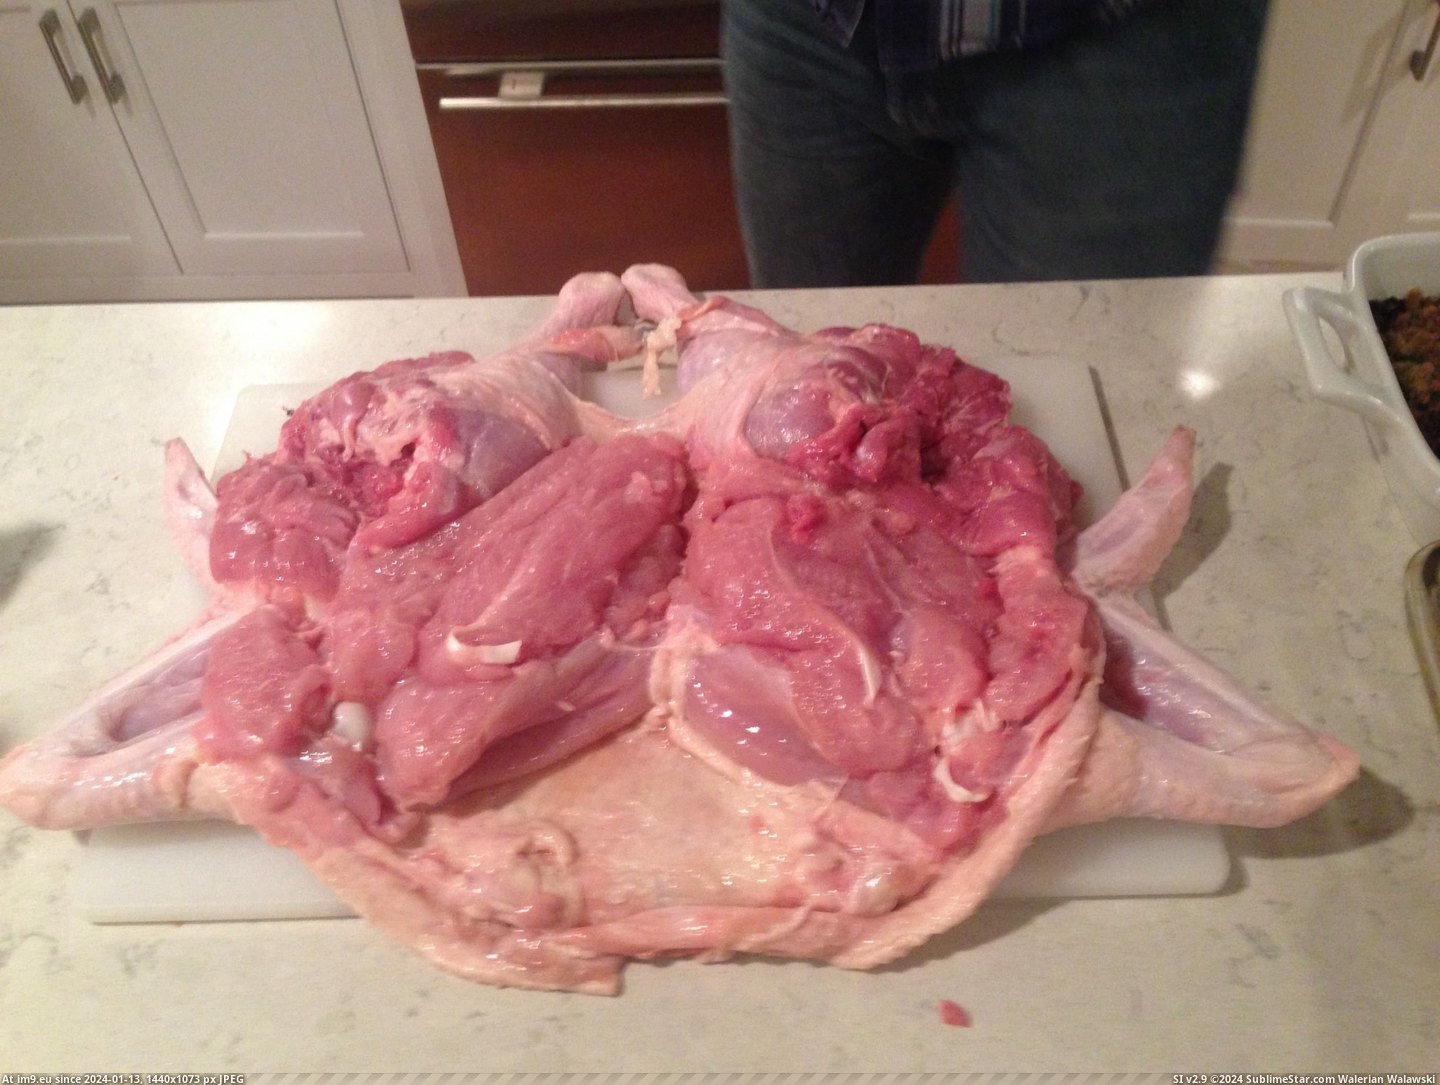 #For #Year #Thought #Thanksgiving #Duck #Turkey #Turducken #Family #See #Chicken [Pics] My family makes turducken (a chicken in a duck in a turkey) every year for Thanksgiving. Thought reddit would like to see Pic. (Image of album My r/PICS favs))